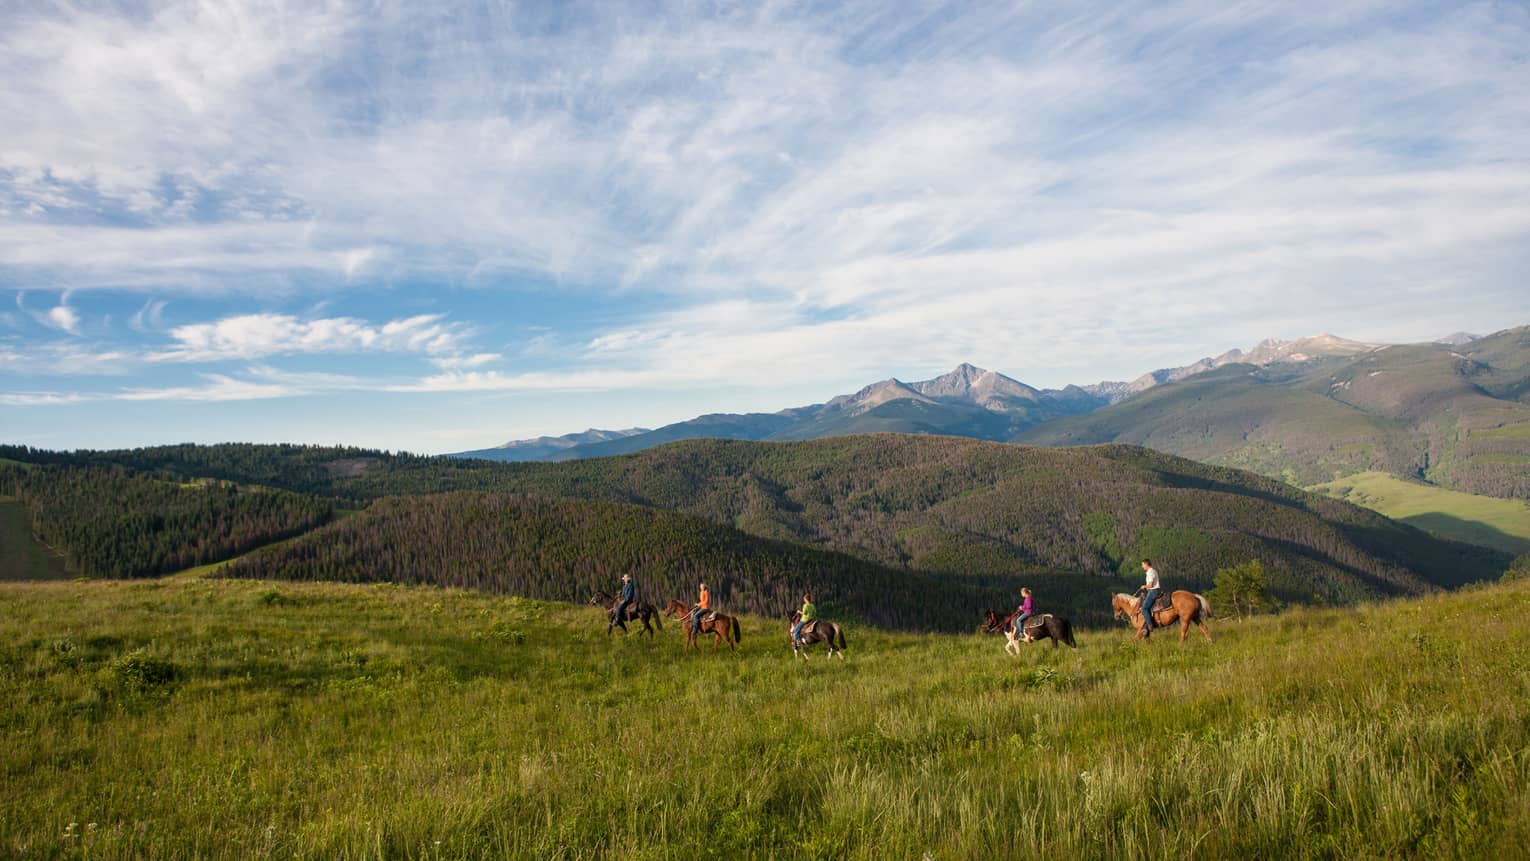 A group of people on horseback riding along grass and hills.